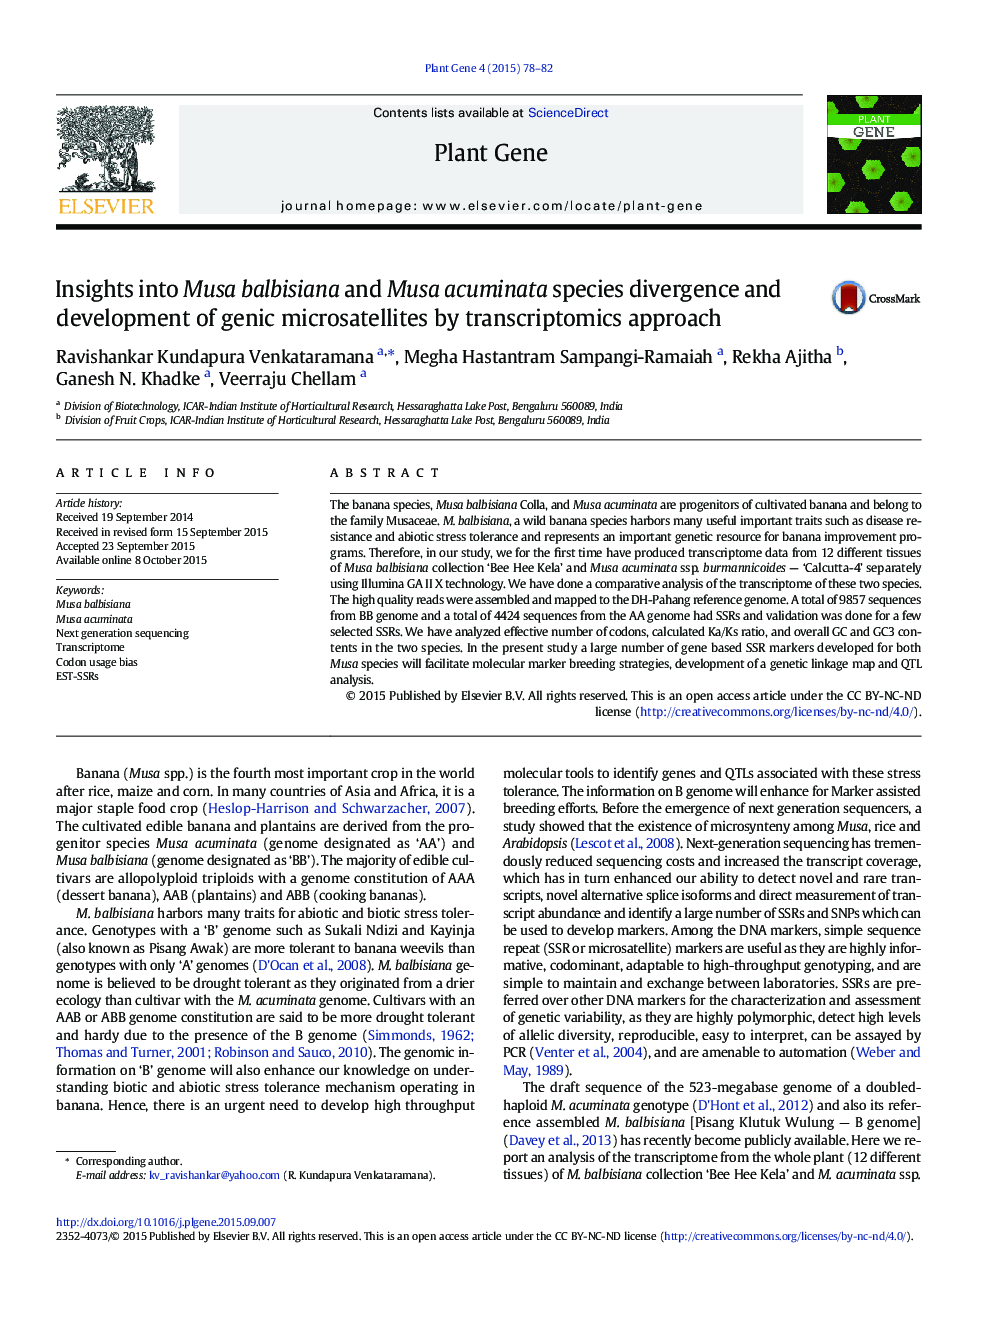 Insights into Musa balbisiana and Musa acuminata species divergence and development of genic microsatellites by transcriptomics approach